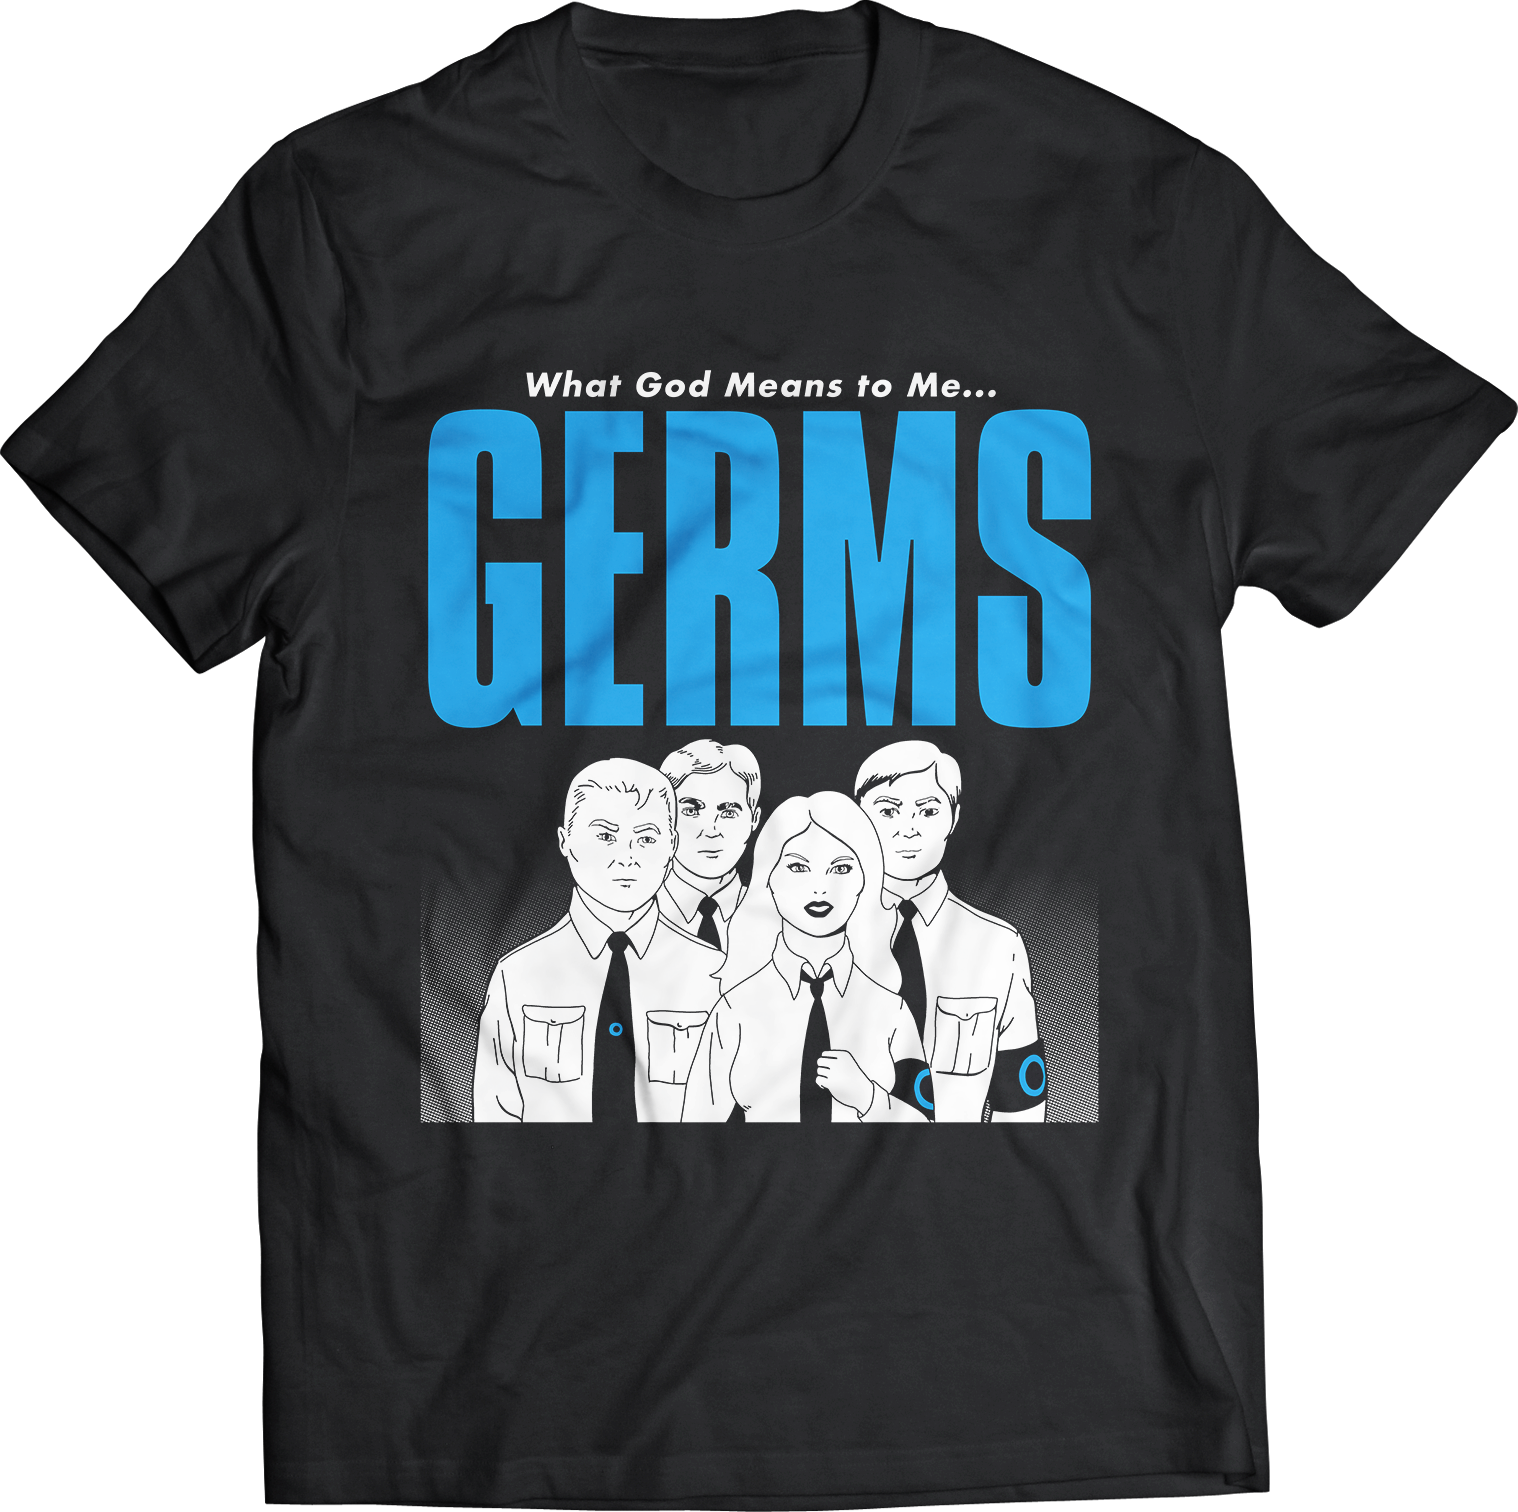 GERMS "WHAT GOD MEANS TO ME" BLACK T-SHIRT